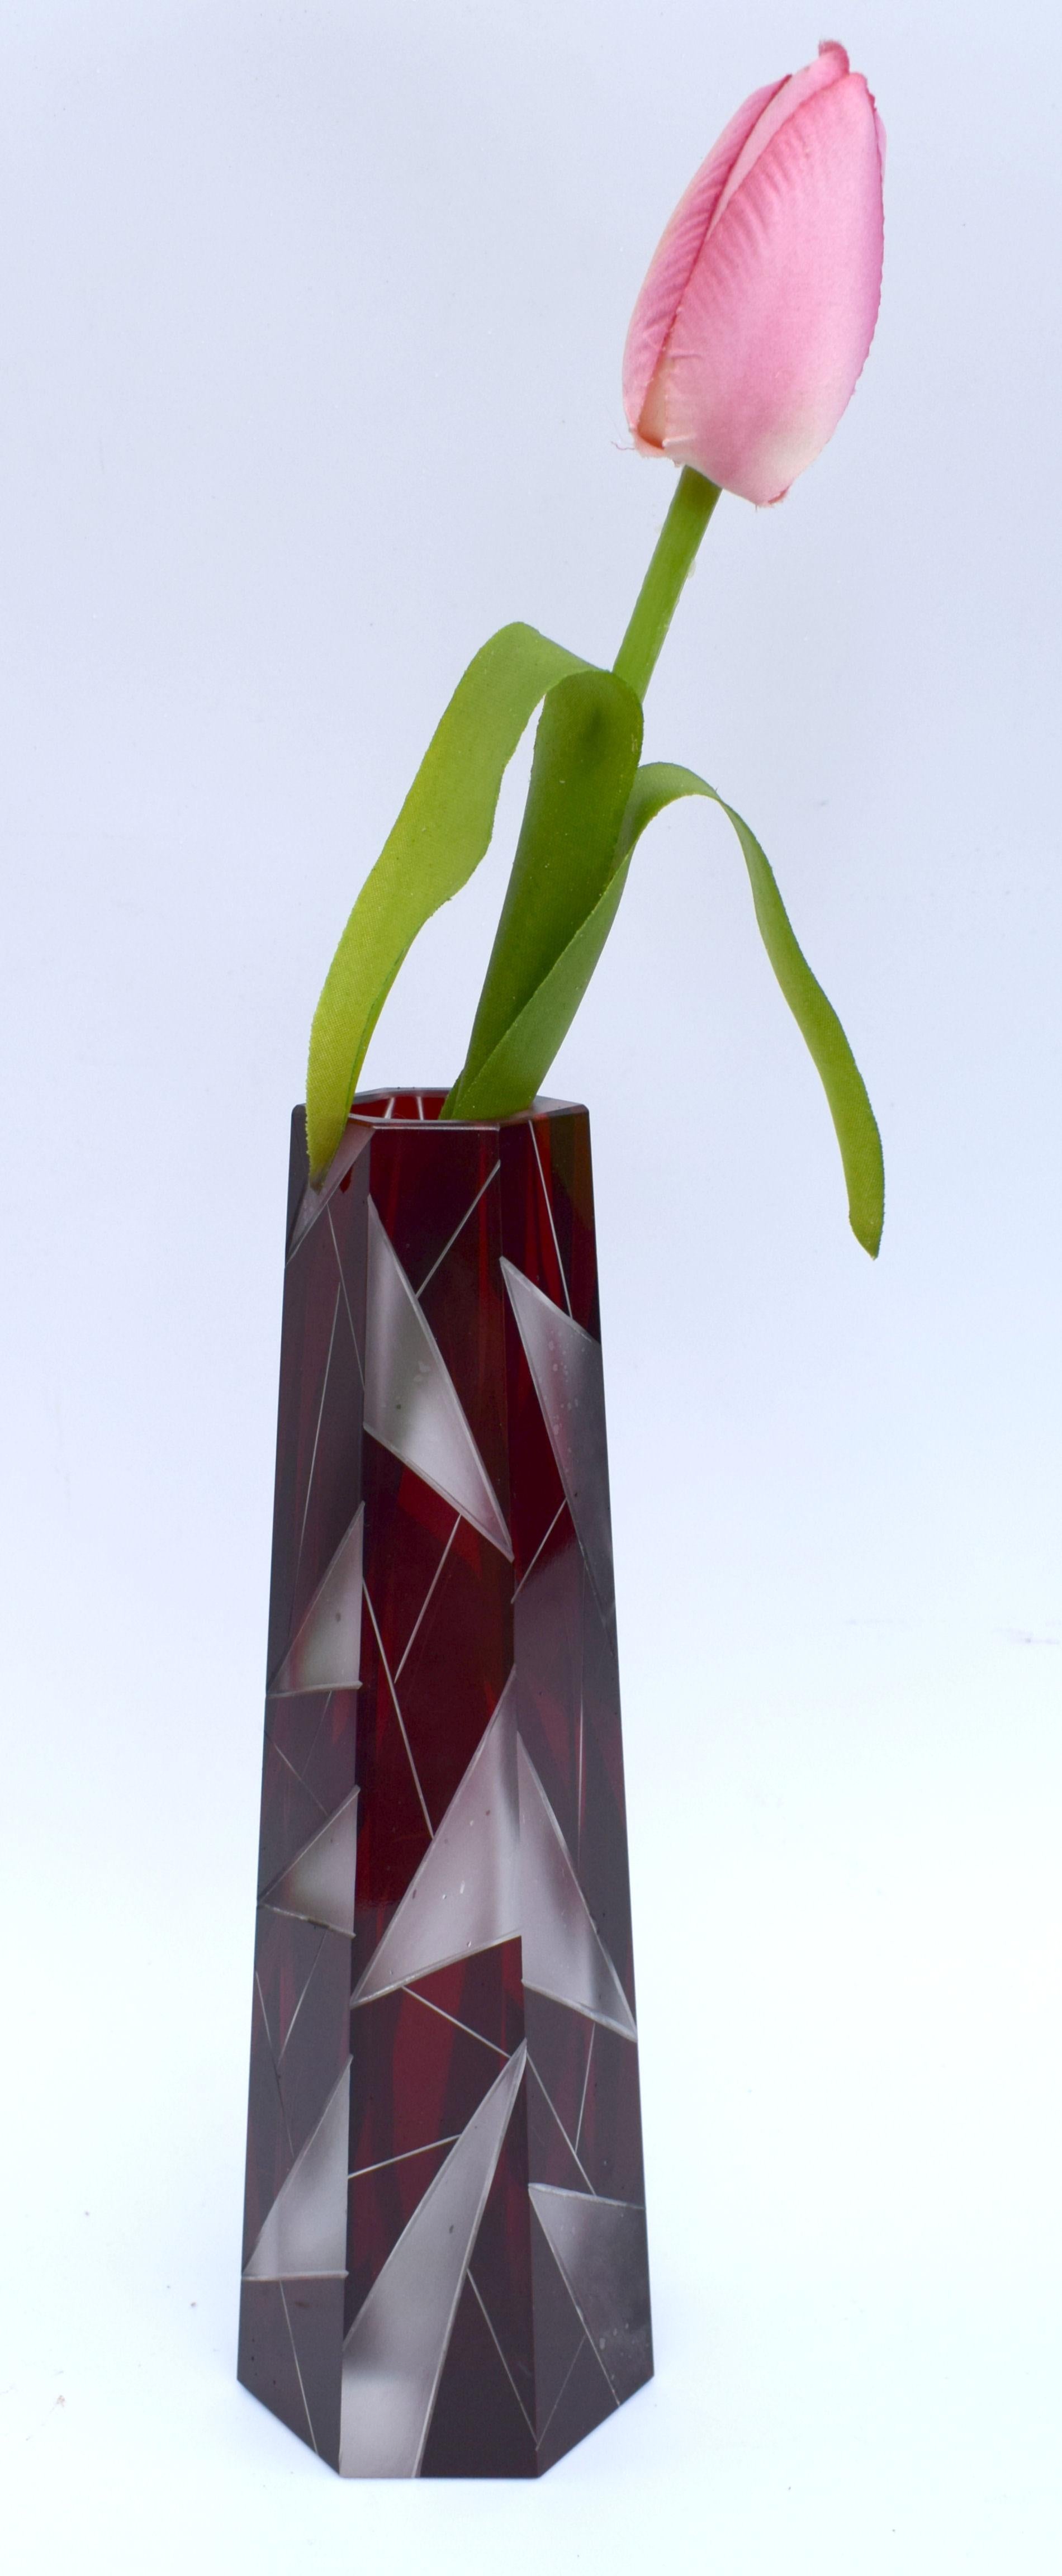 Wonderfully stylish geometric patterned glass vase from Czech Republic. Great size for modern day use, please see dimensions. Deep red, almost maroon coloured enamel decoration with segments of triangular frosted panels intersecting, superb overall